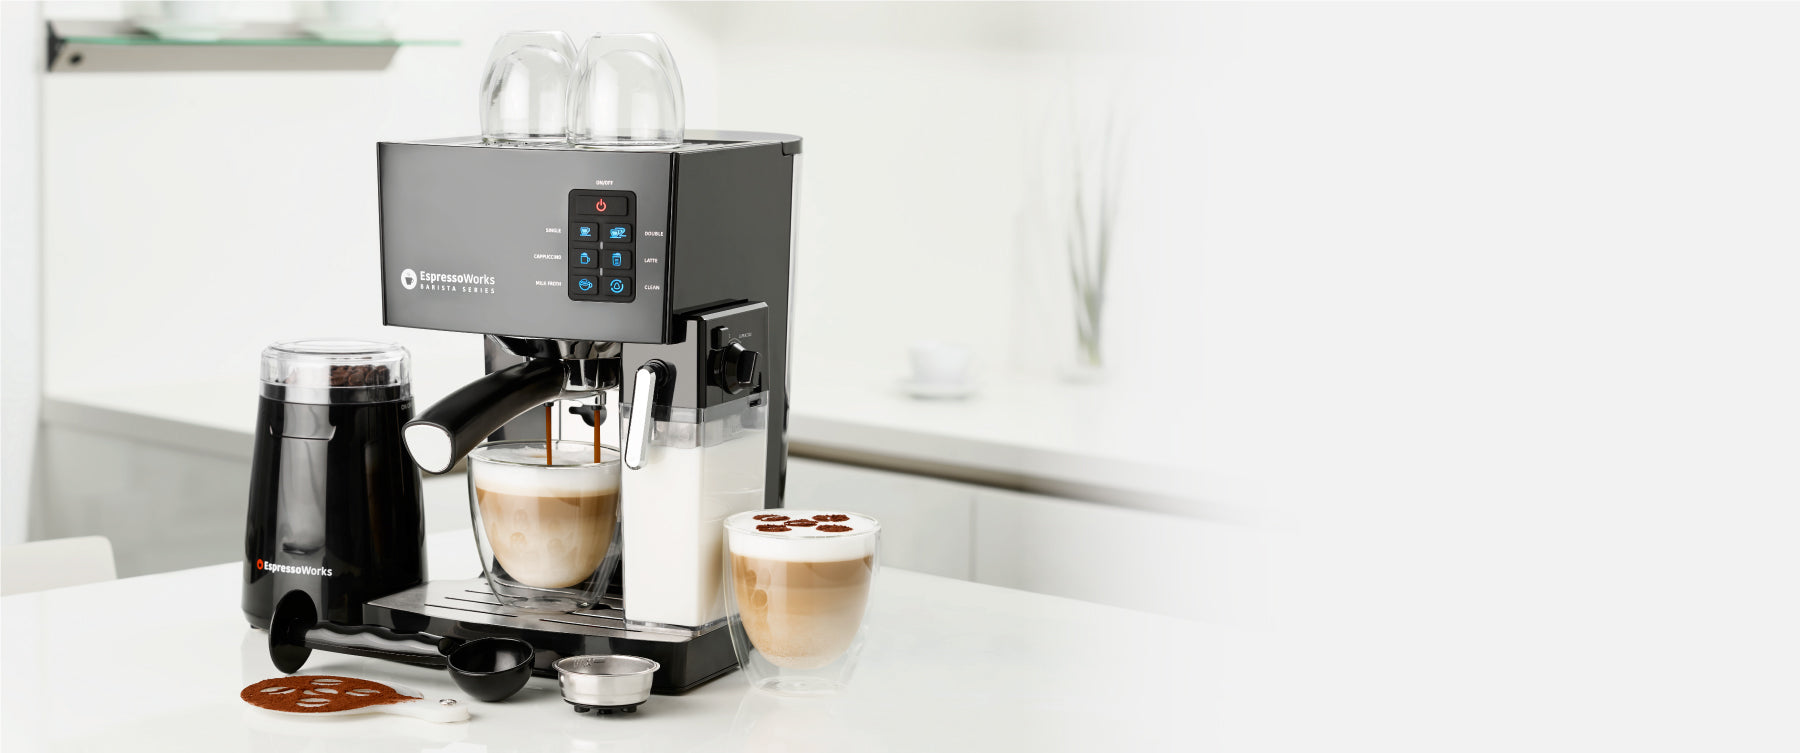 Click on the link to download the user guide for the 10-piece 19-bar EspressoWorks Espresso Machine 